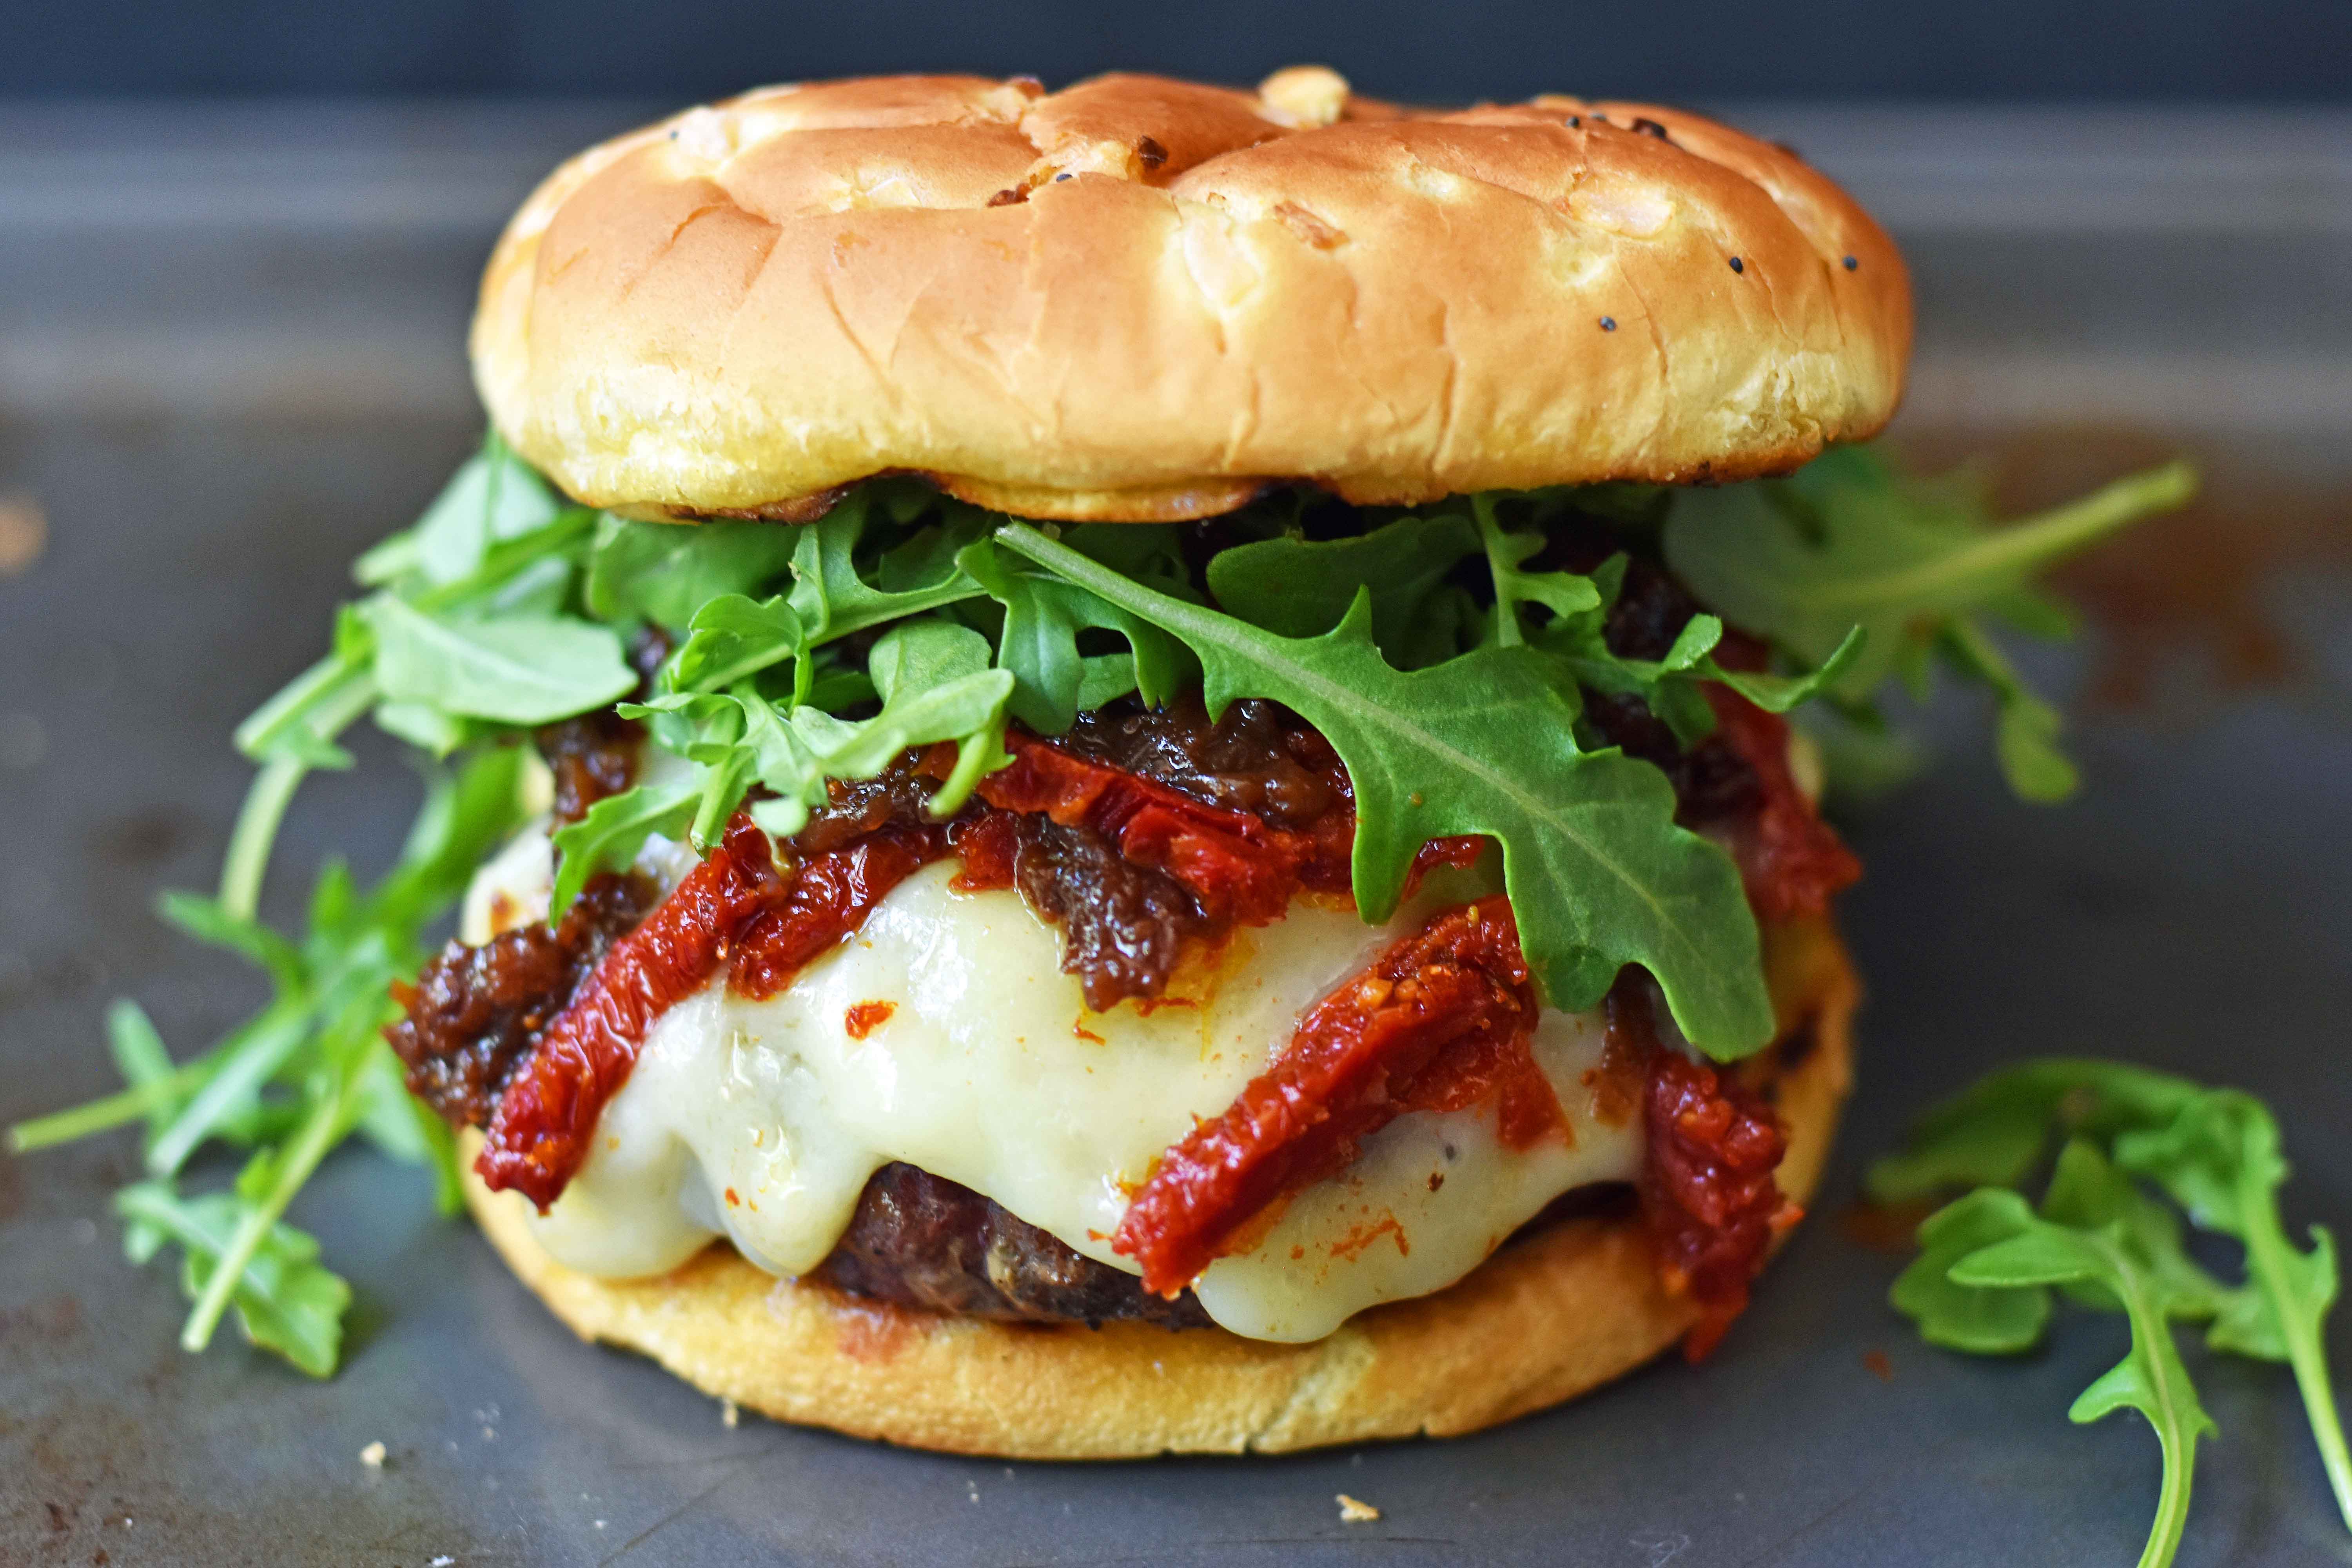 Brie Burger with Caramelized Onions and Sundried Tomatoes The Ultimate Burger with melted Brie Cheese, Sundried Tomatoes, Queen Creek Olive Mill Caramelized Red Onion Fig Tapenade, and Arugula. How to make the perfect burger. www.modernhoney.com 